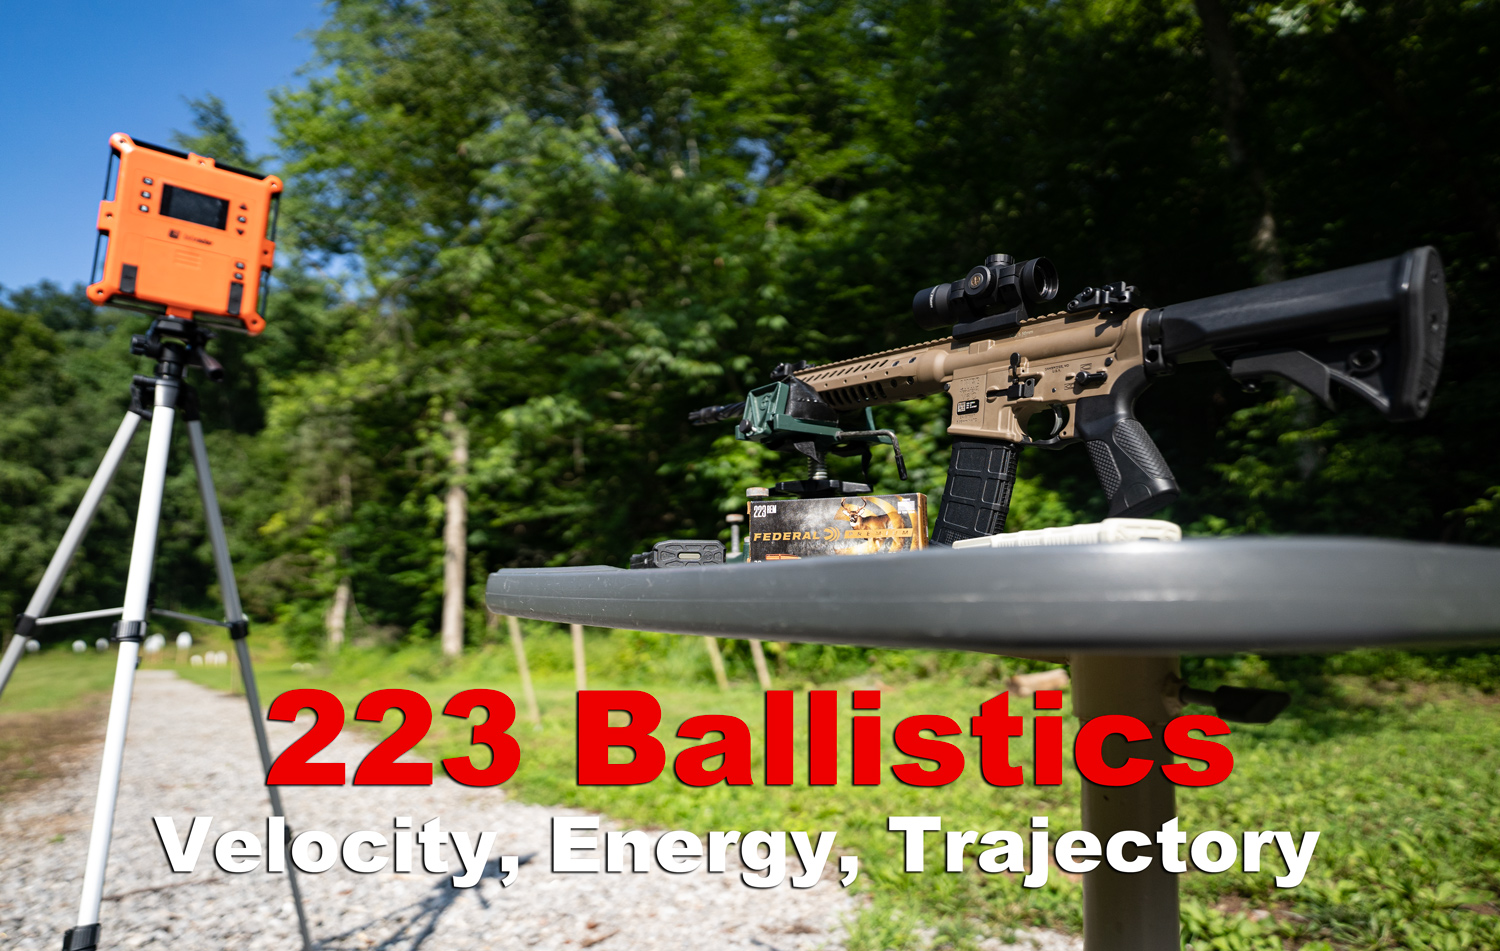 testing 223 ballistics with an AR-15 at a shooting range and ammo